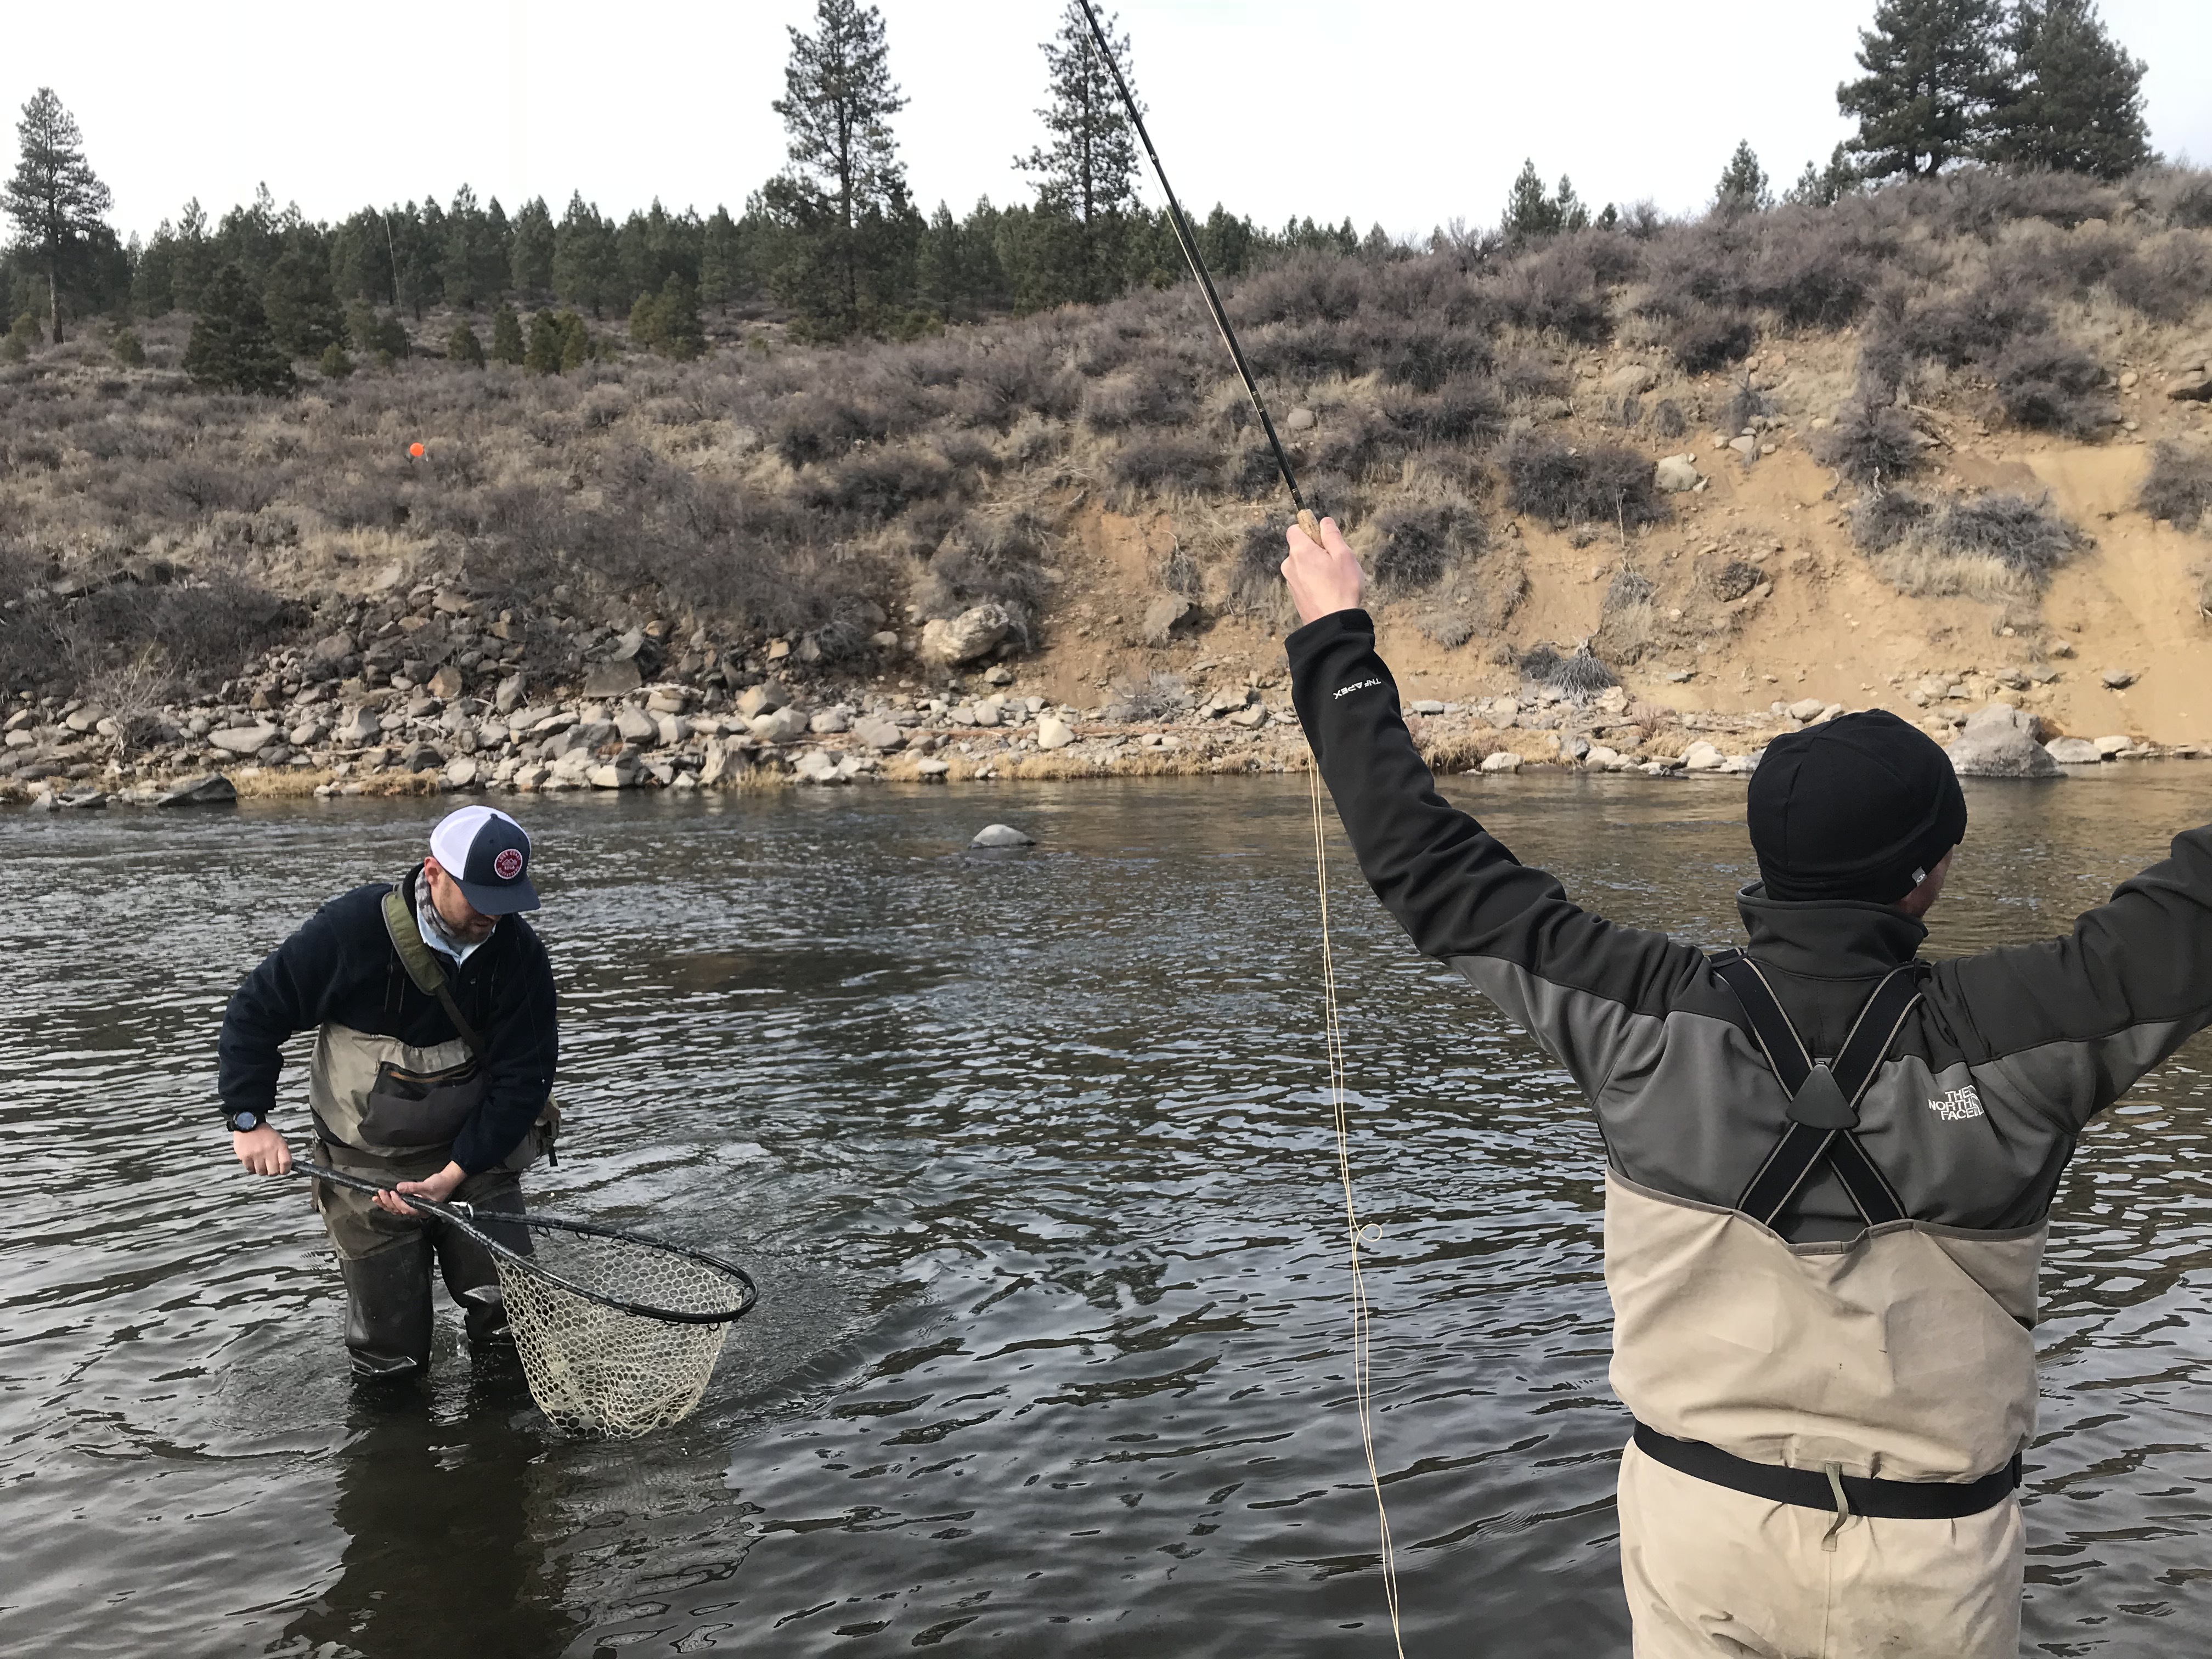 Guided Fly Fishing on The Truckee River with Maher's Guide Service